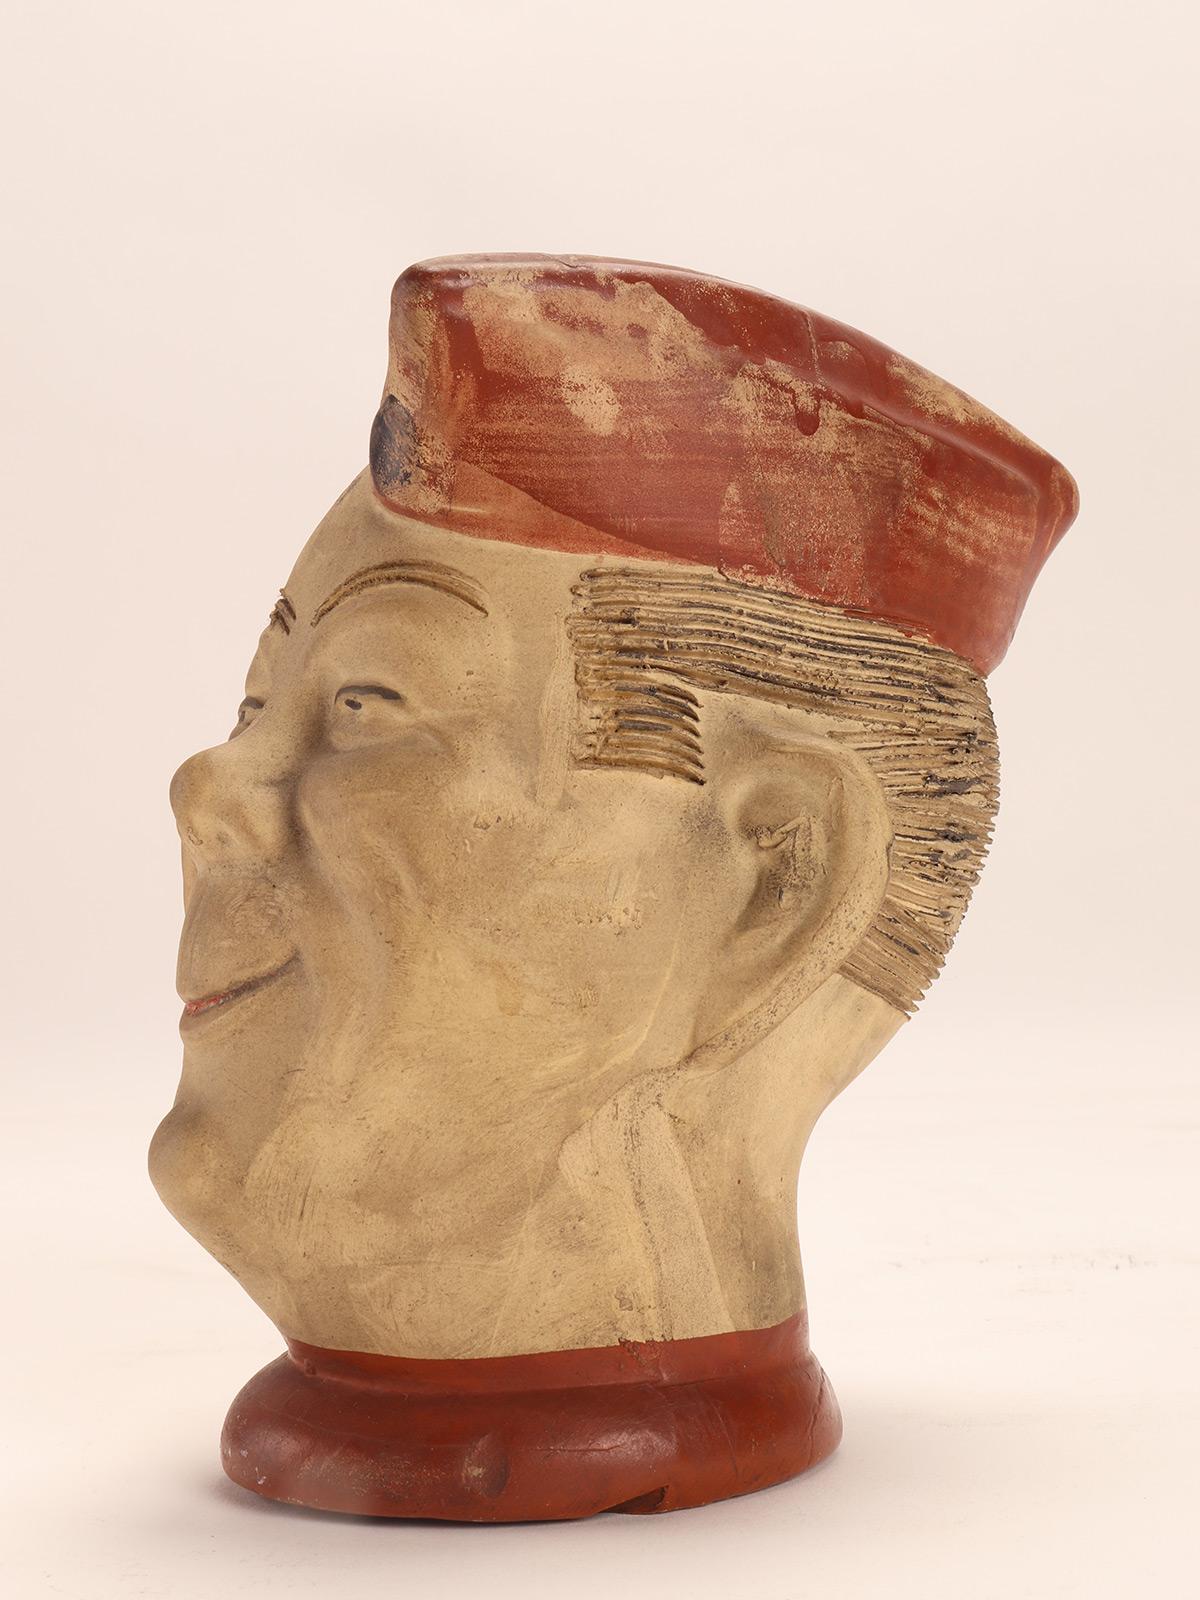 Unglazed terracotta pottery vase, by Elmer Early Chia Pet, depicting a soldier's head from the Second World War, wearing a red hat. Made by Robinson-Ransbottom Pottery Company in Ohio, USA in the 1940's.